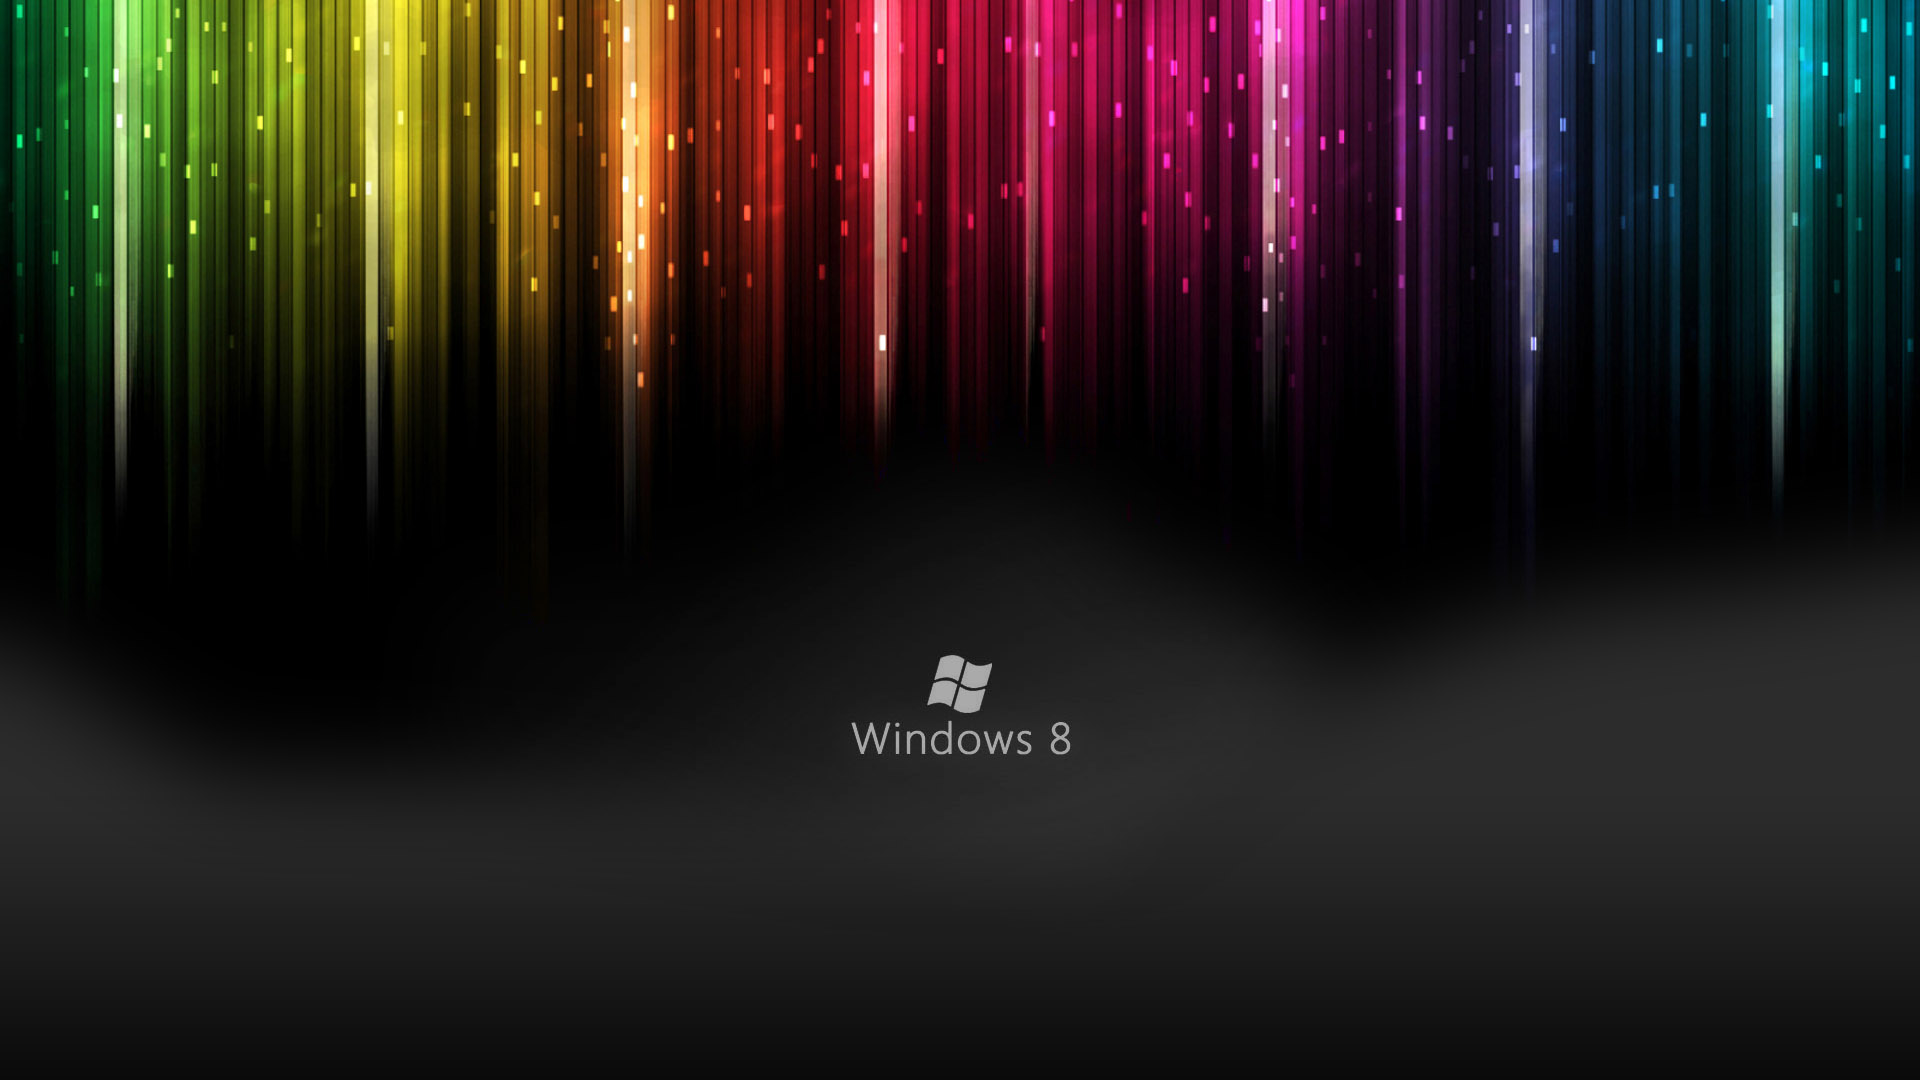 Windows 8 Live Wallpapers HD Wallpapers | Chainimage